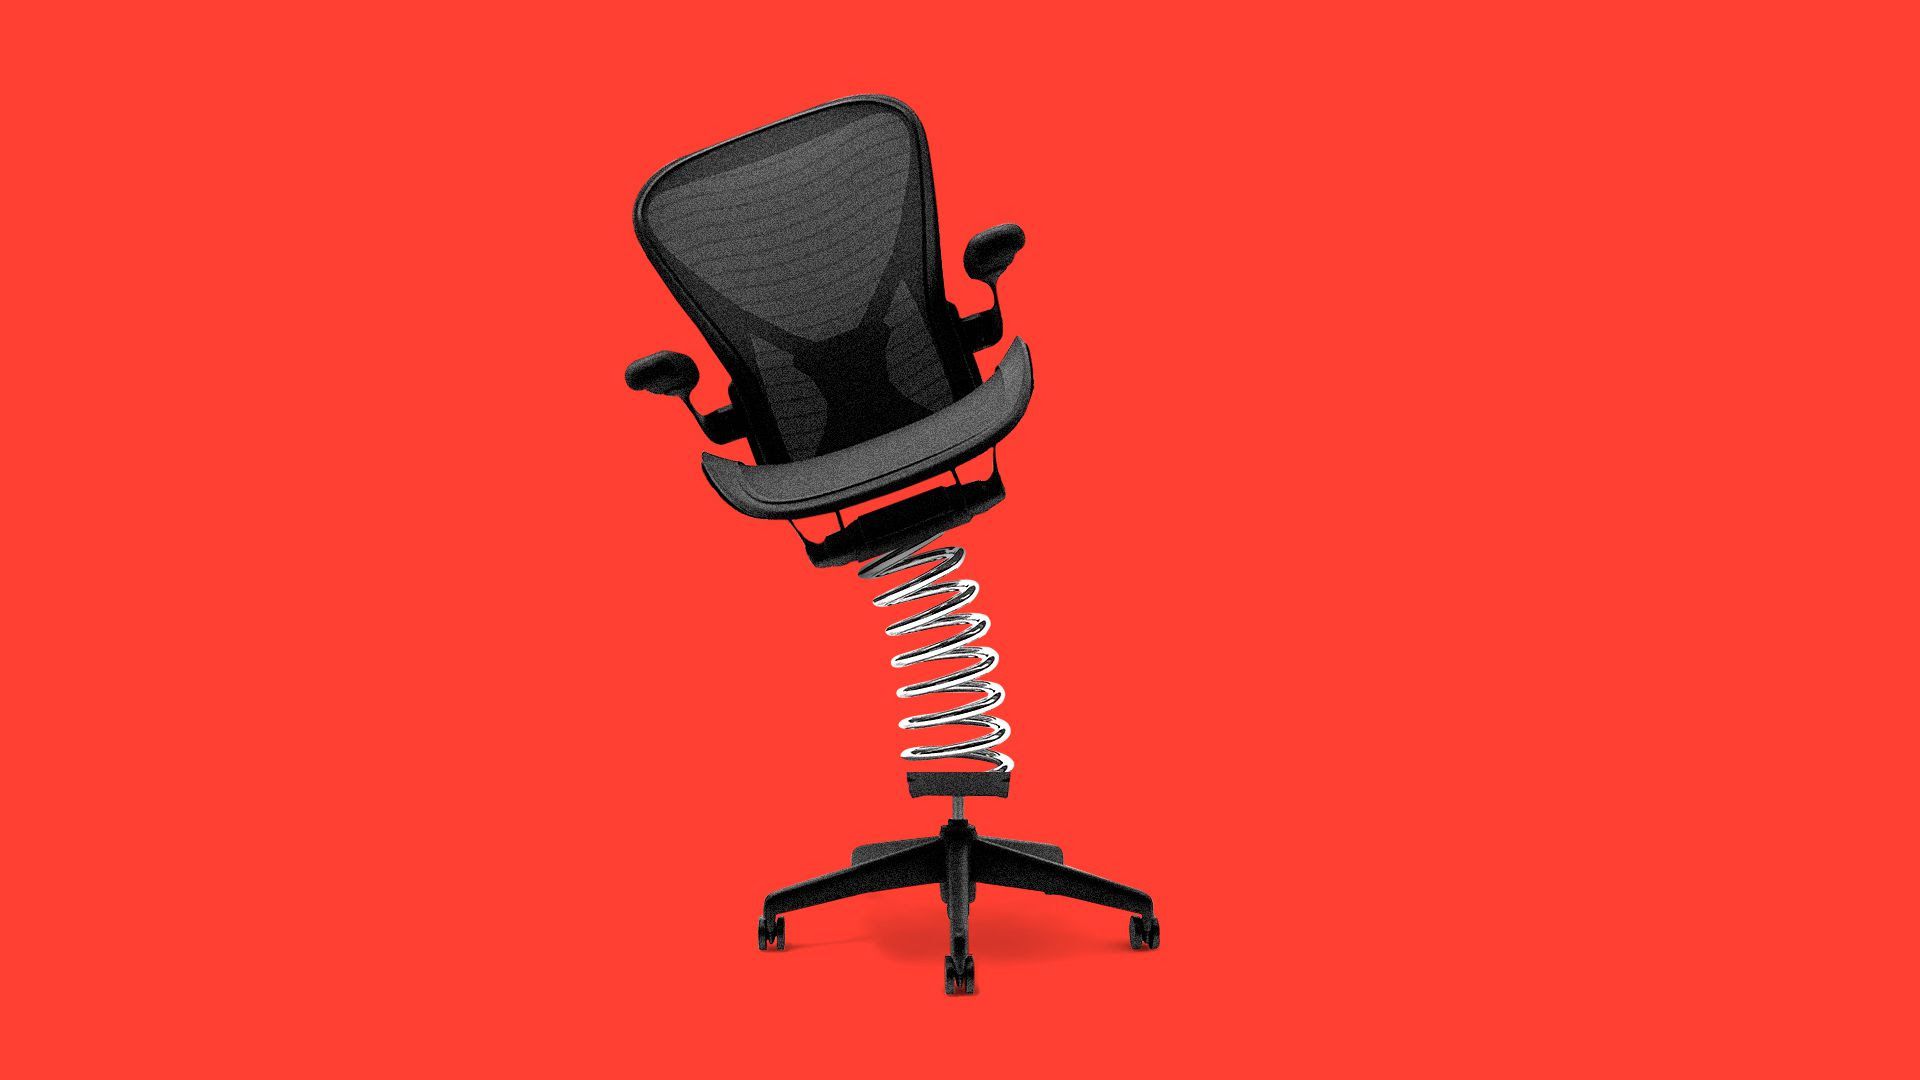 An illustration of a desk chair with springs on the seat in front of a red background.